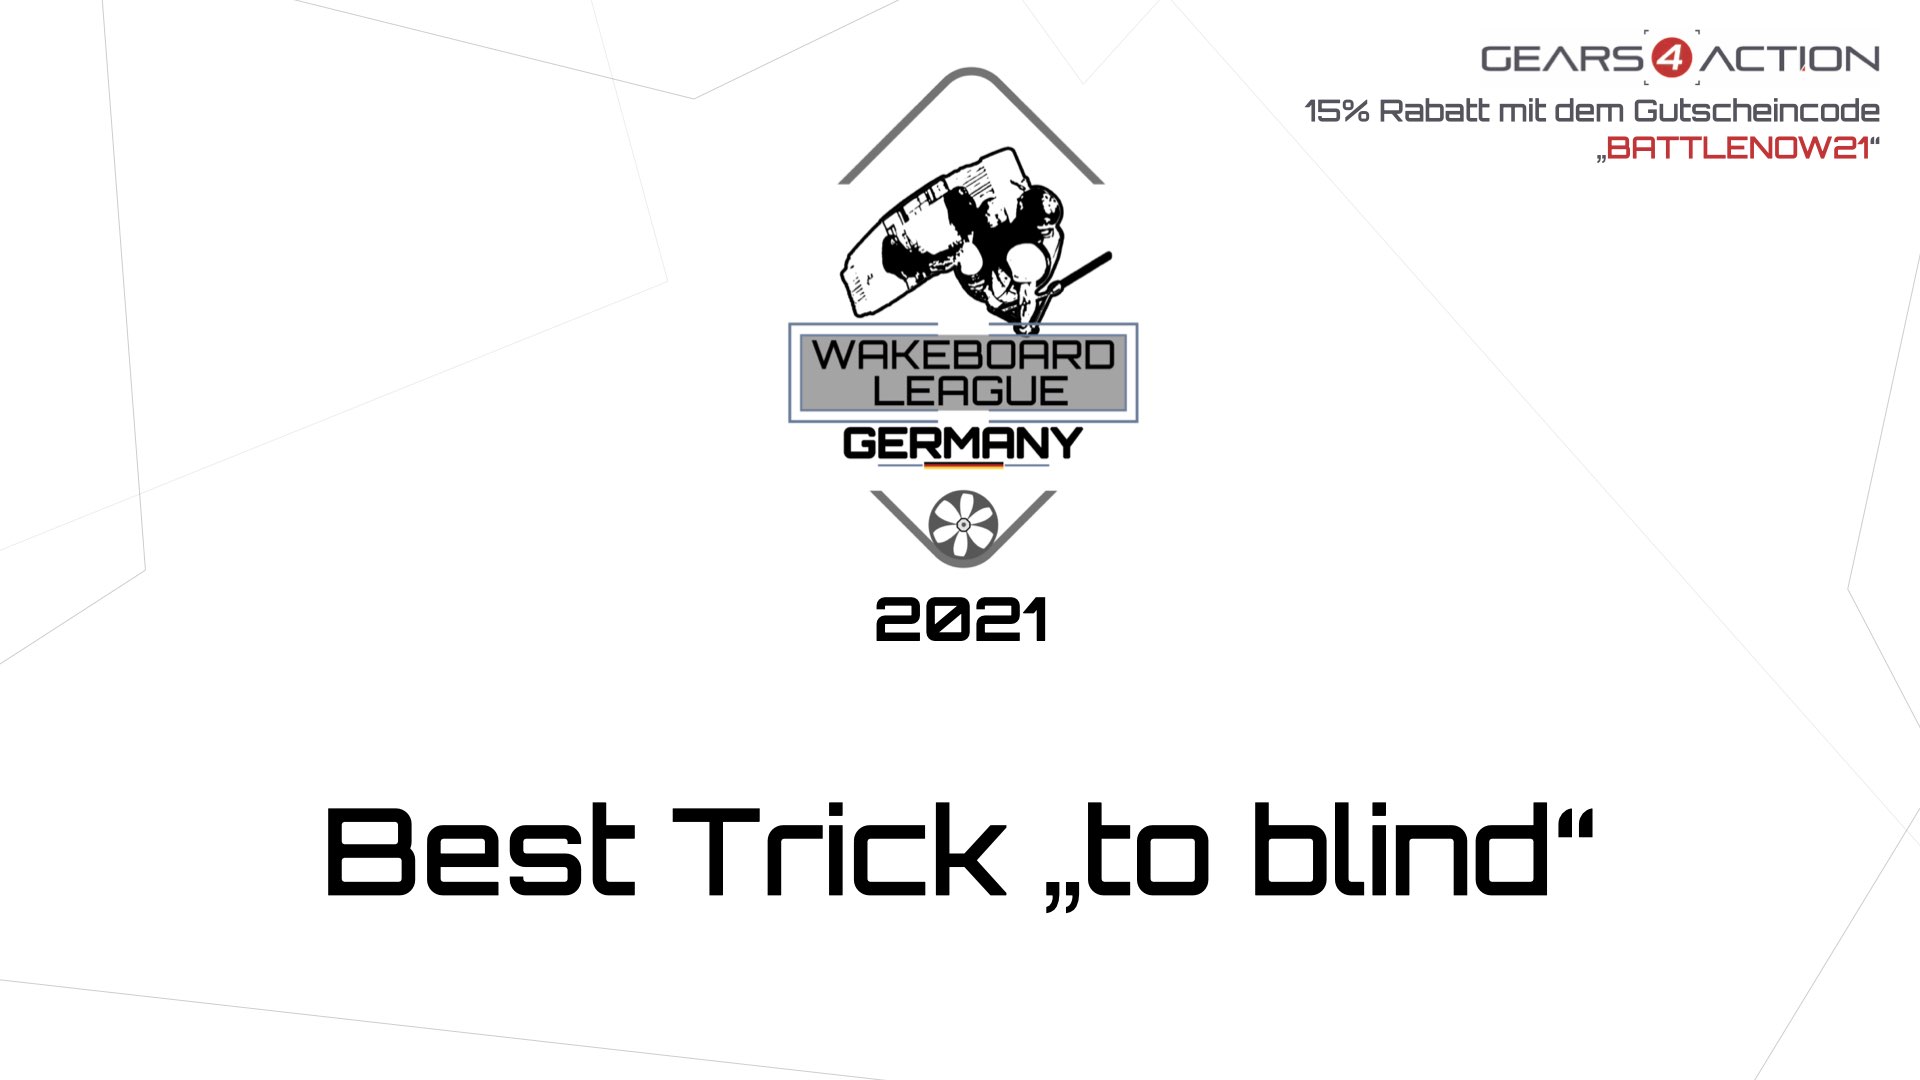 Wakeboard League Germany 2021 - #4 Best Trick "to blind"